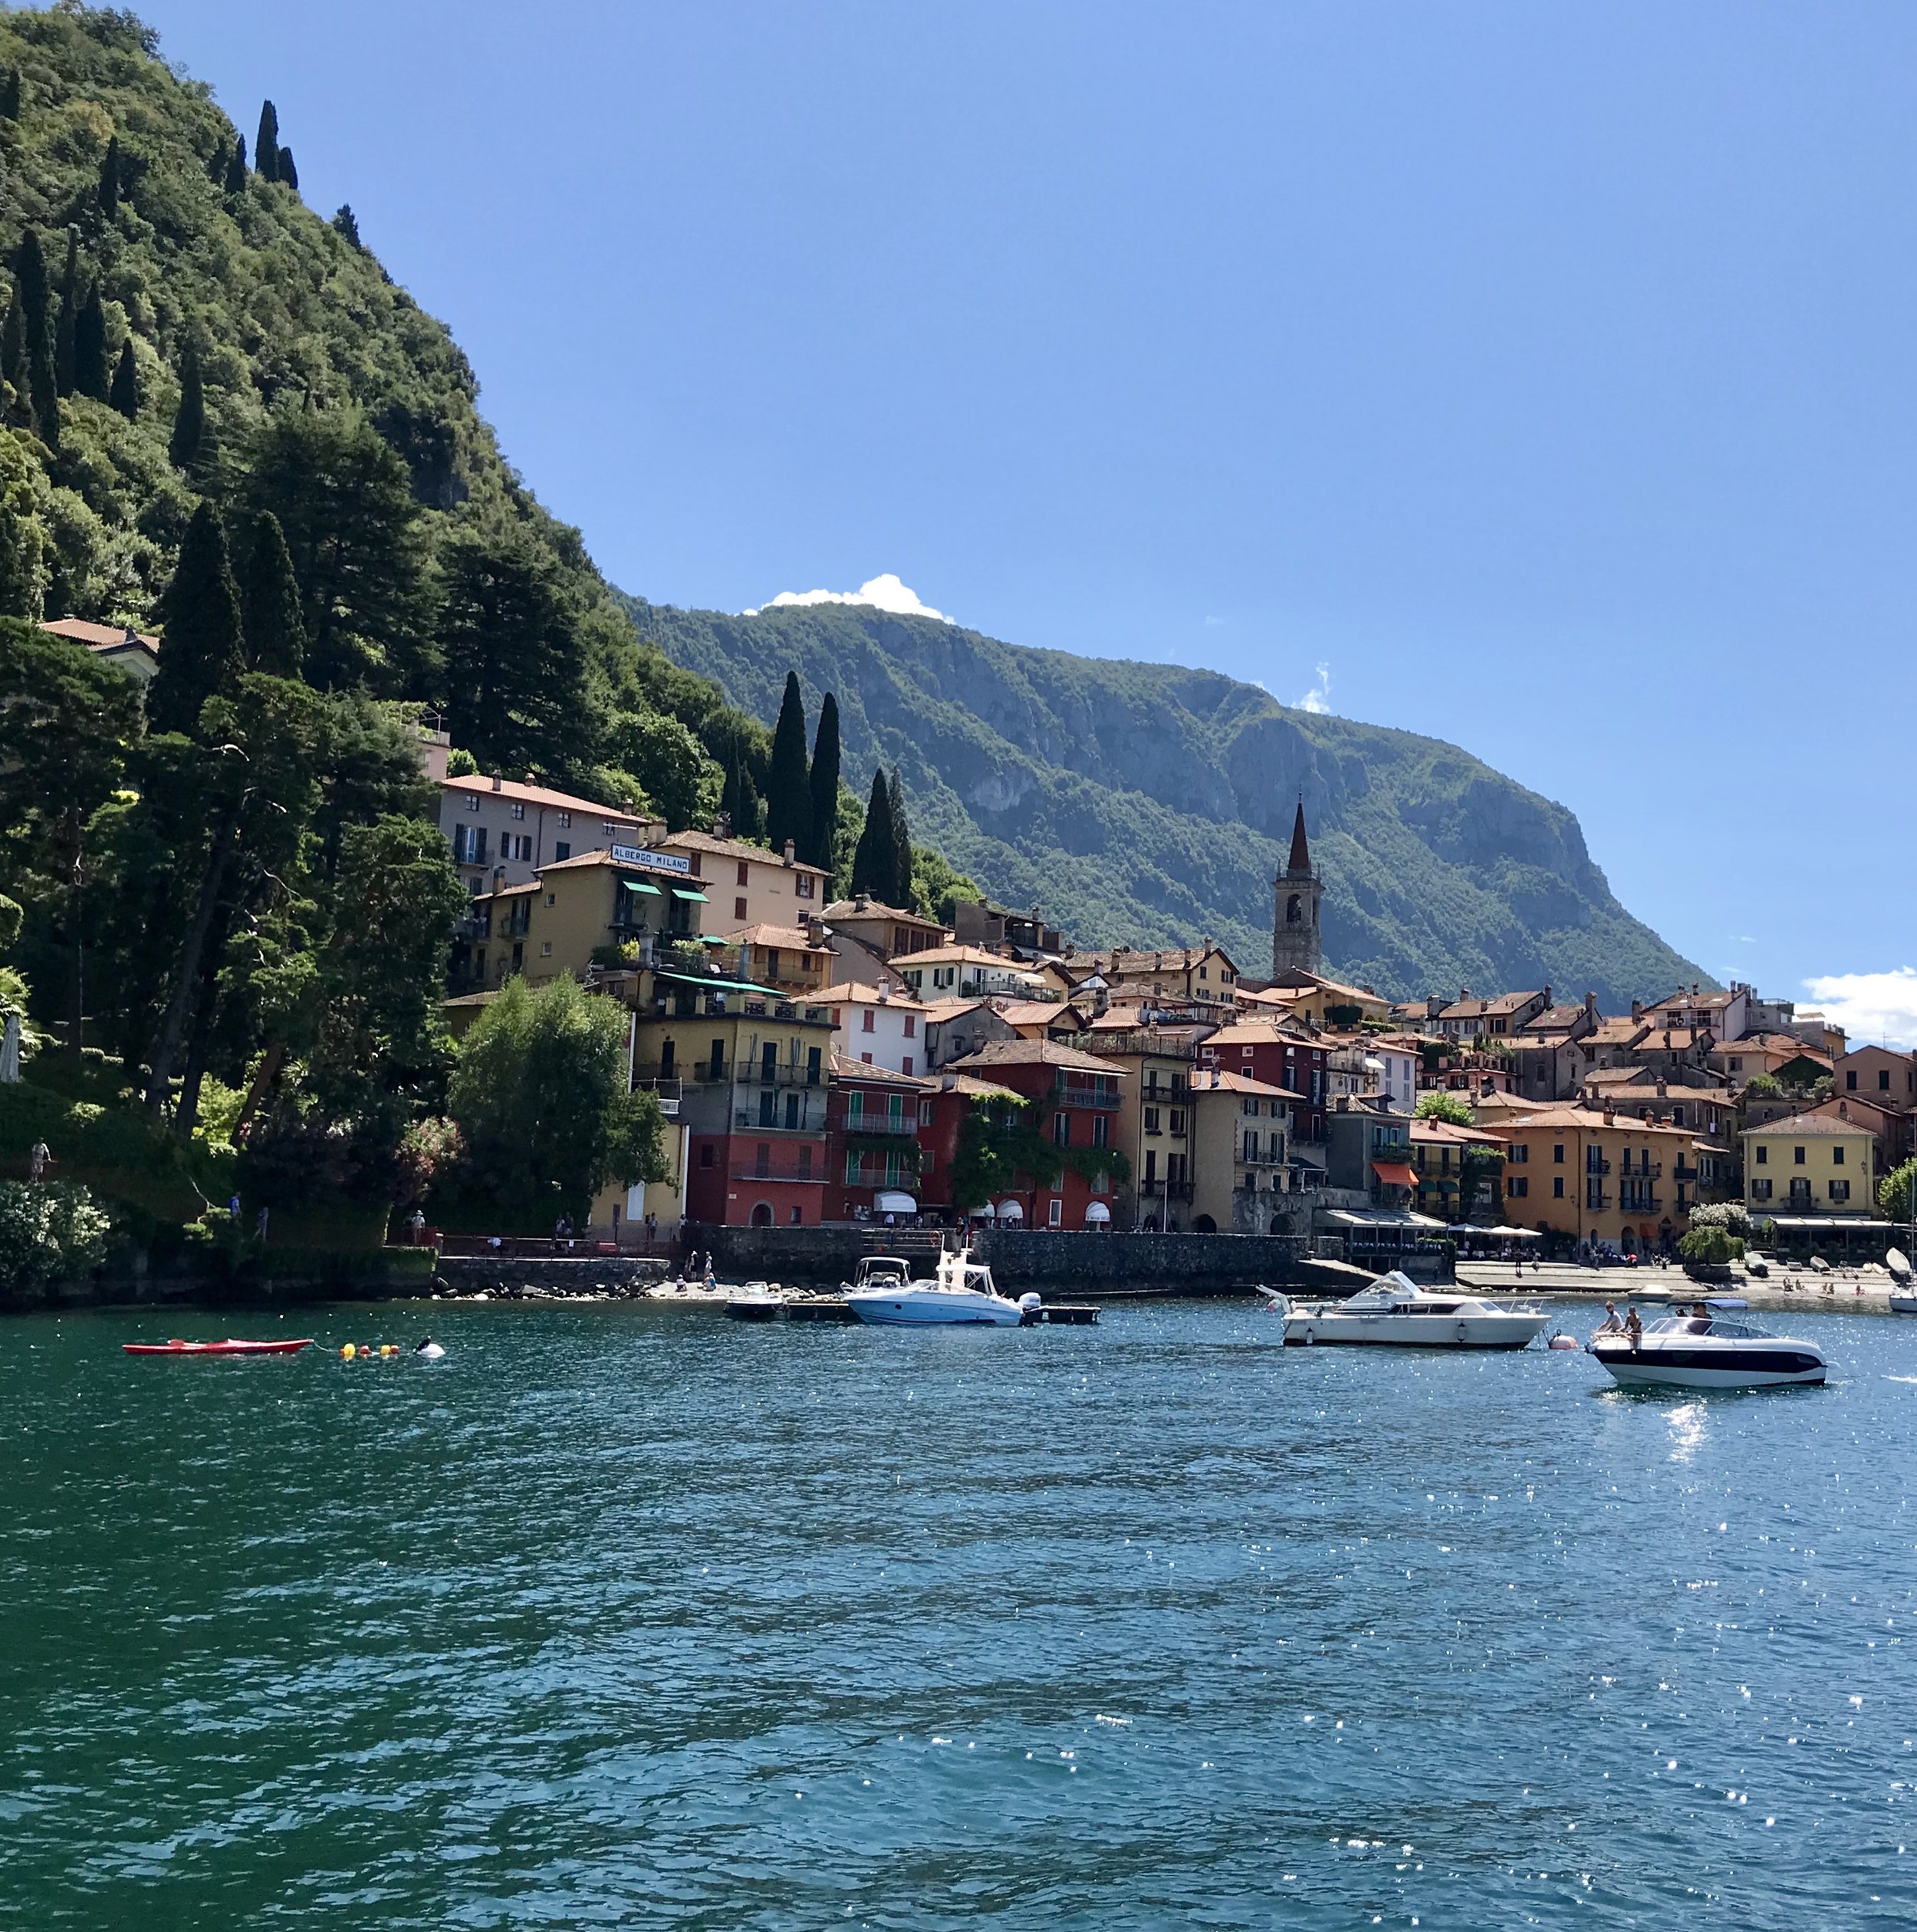 First view of Bellagio, arriving by ferry 